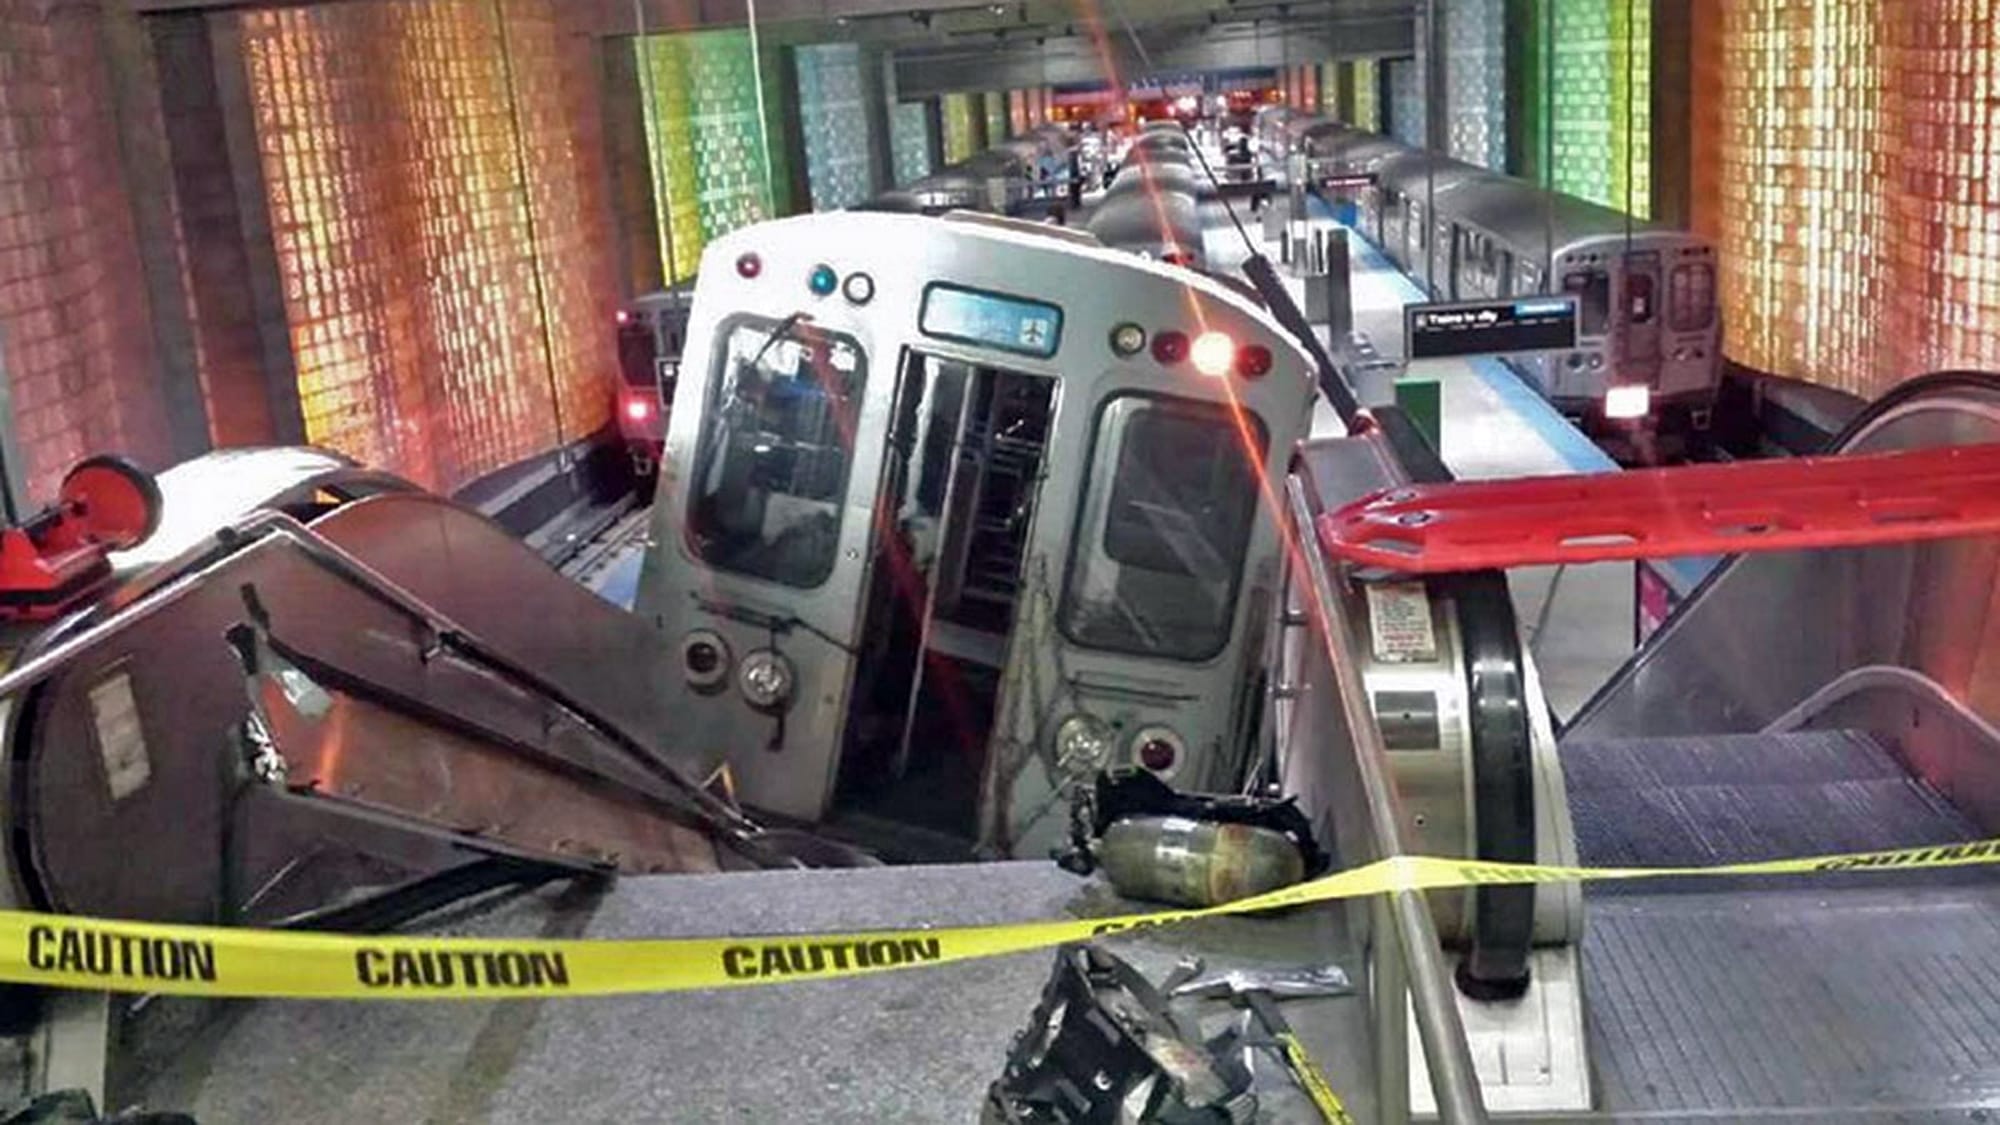 A Chicago Transit Authority train car rests on an escalator at the O'Hare Airport station after it derailed early Monday  injuring more than 30 people in Chicago.